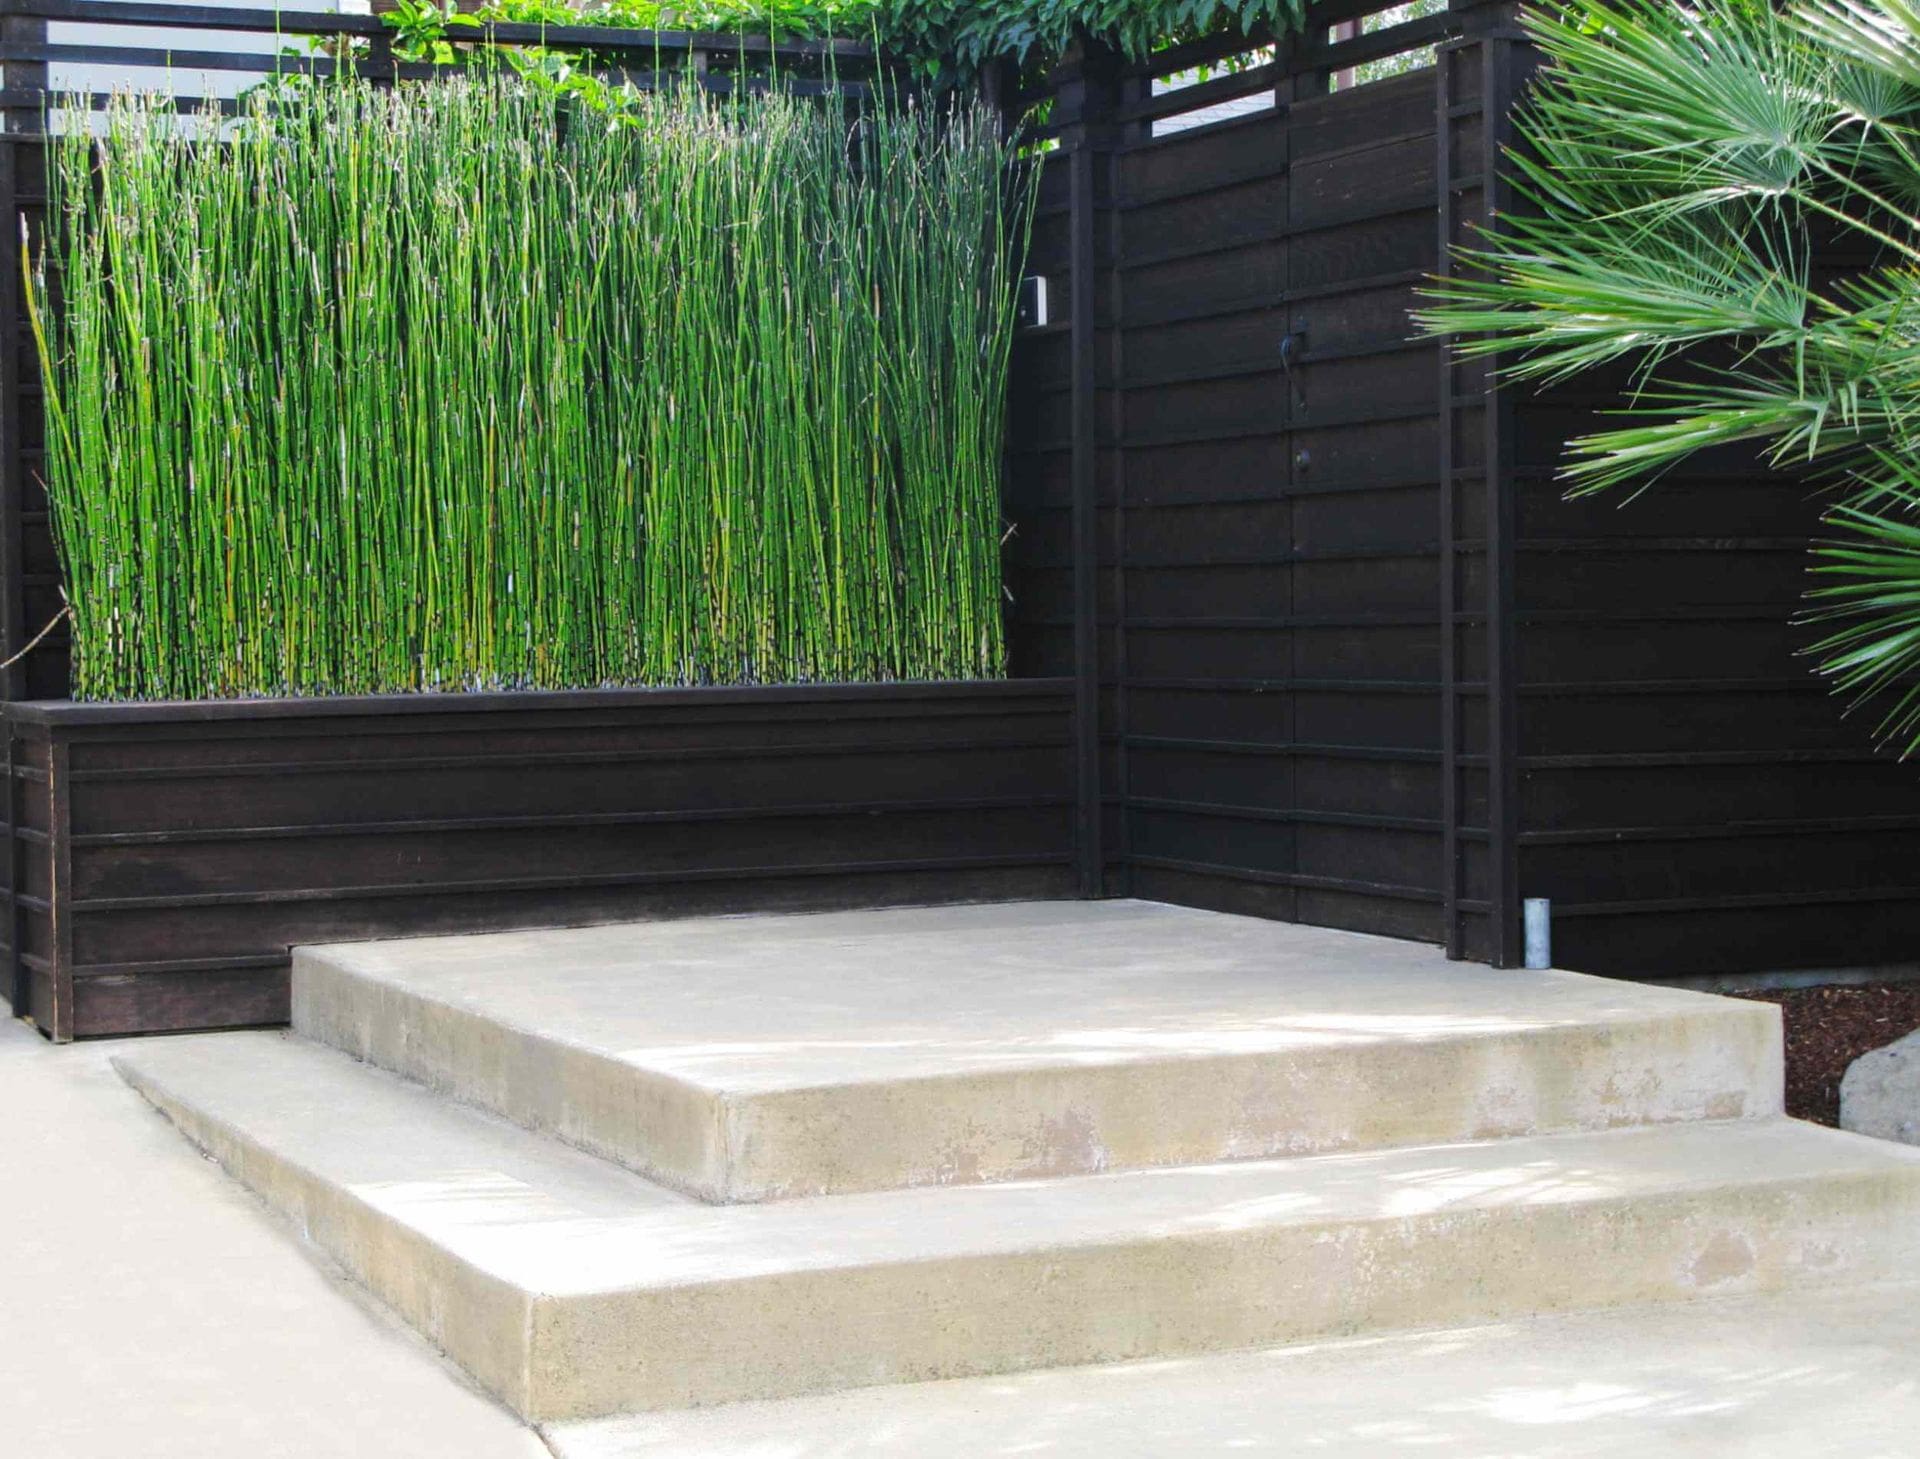 Image shows a minimalist outdoor garden area with high-quality concrete steps leading up to a dark wooden fence. Behind the fence, a dense arrangement of tall, green potted bamboo plants provides a refreshing backdrop. A palm tree is visible on the right side, showcasing the expertise of Concrete contractors Buckeye AZ.